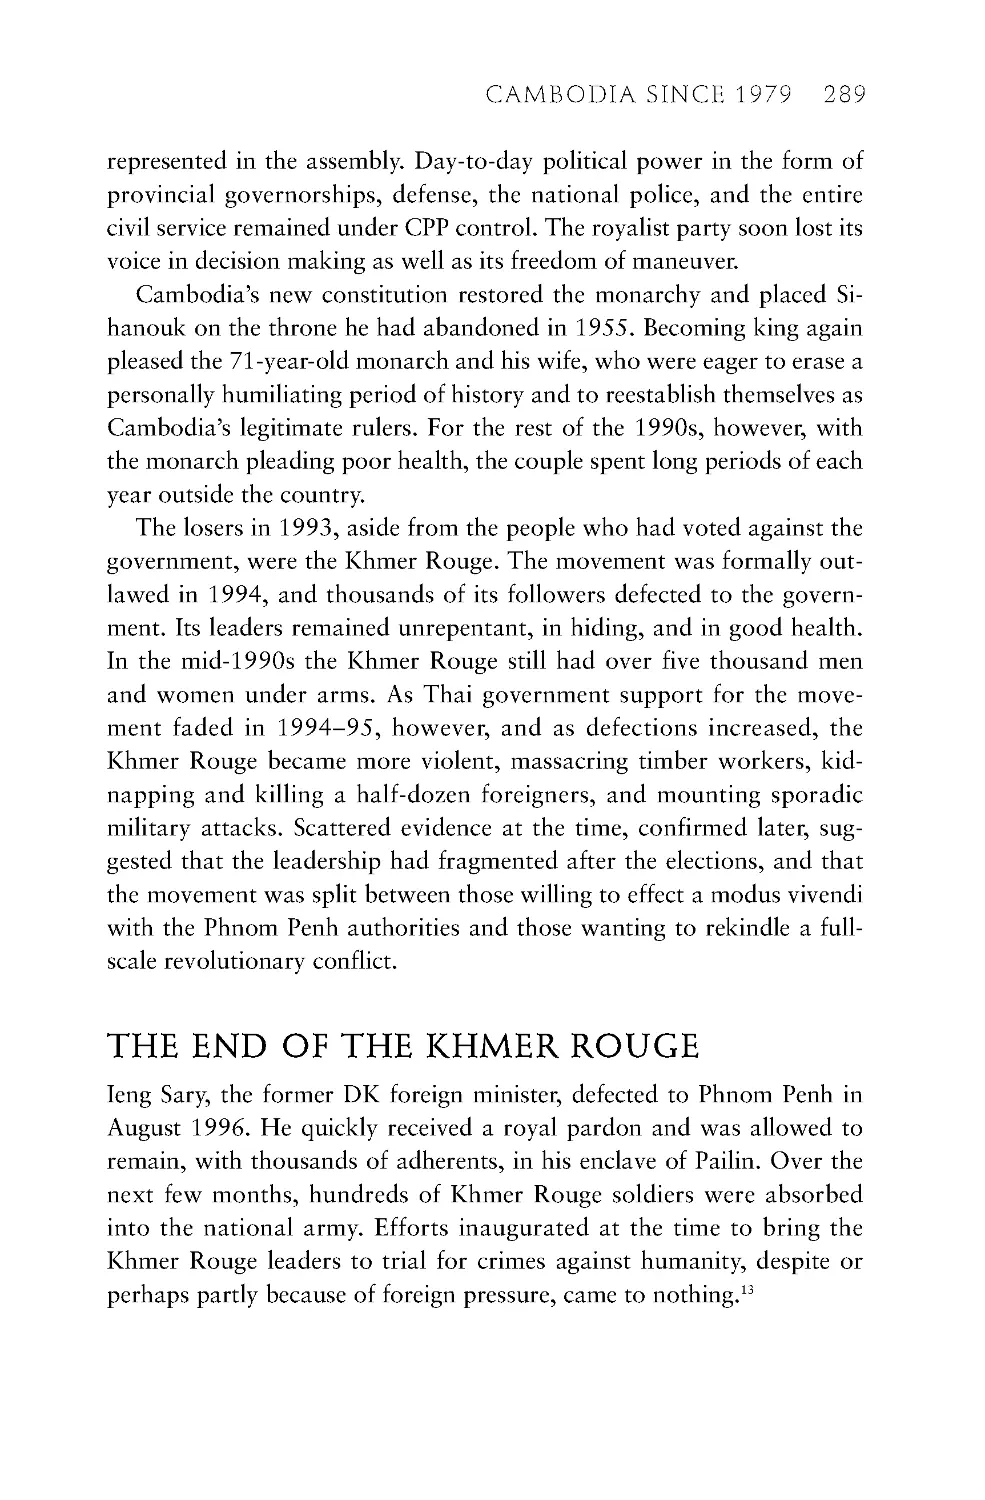 The End of the Khmer Rouge